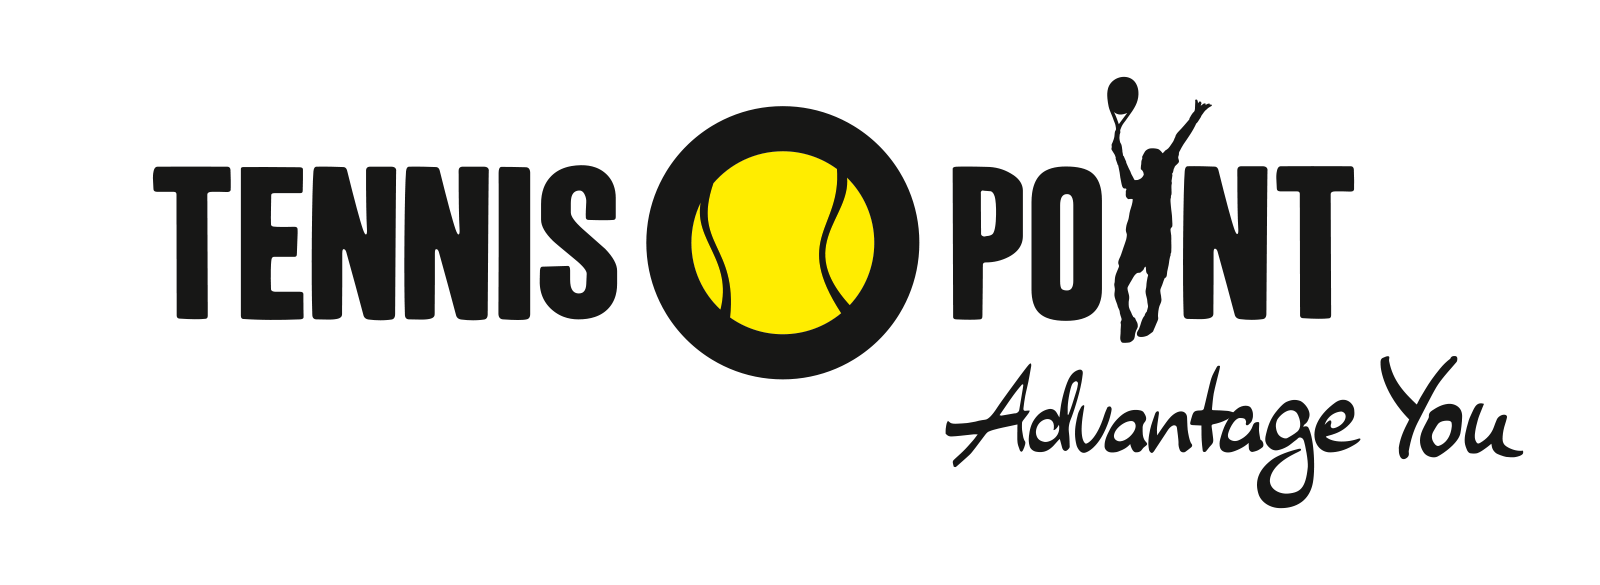 tennis point.png